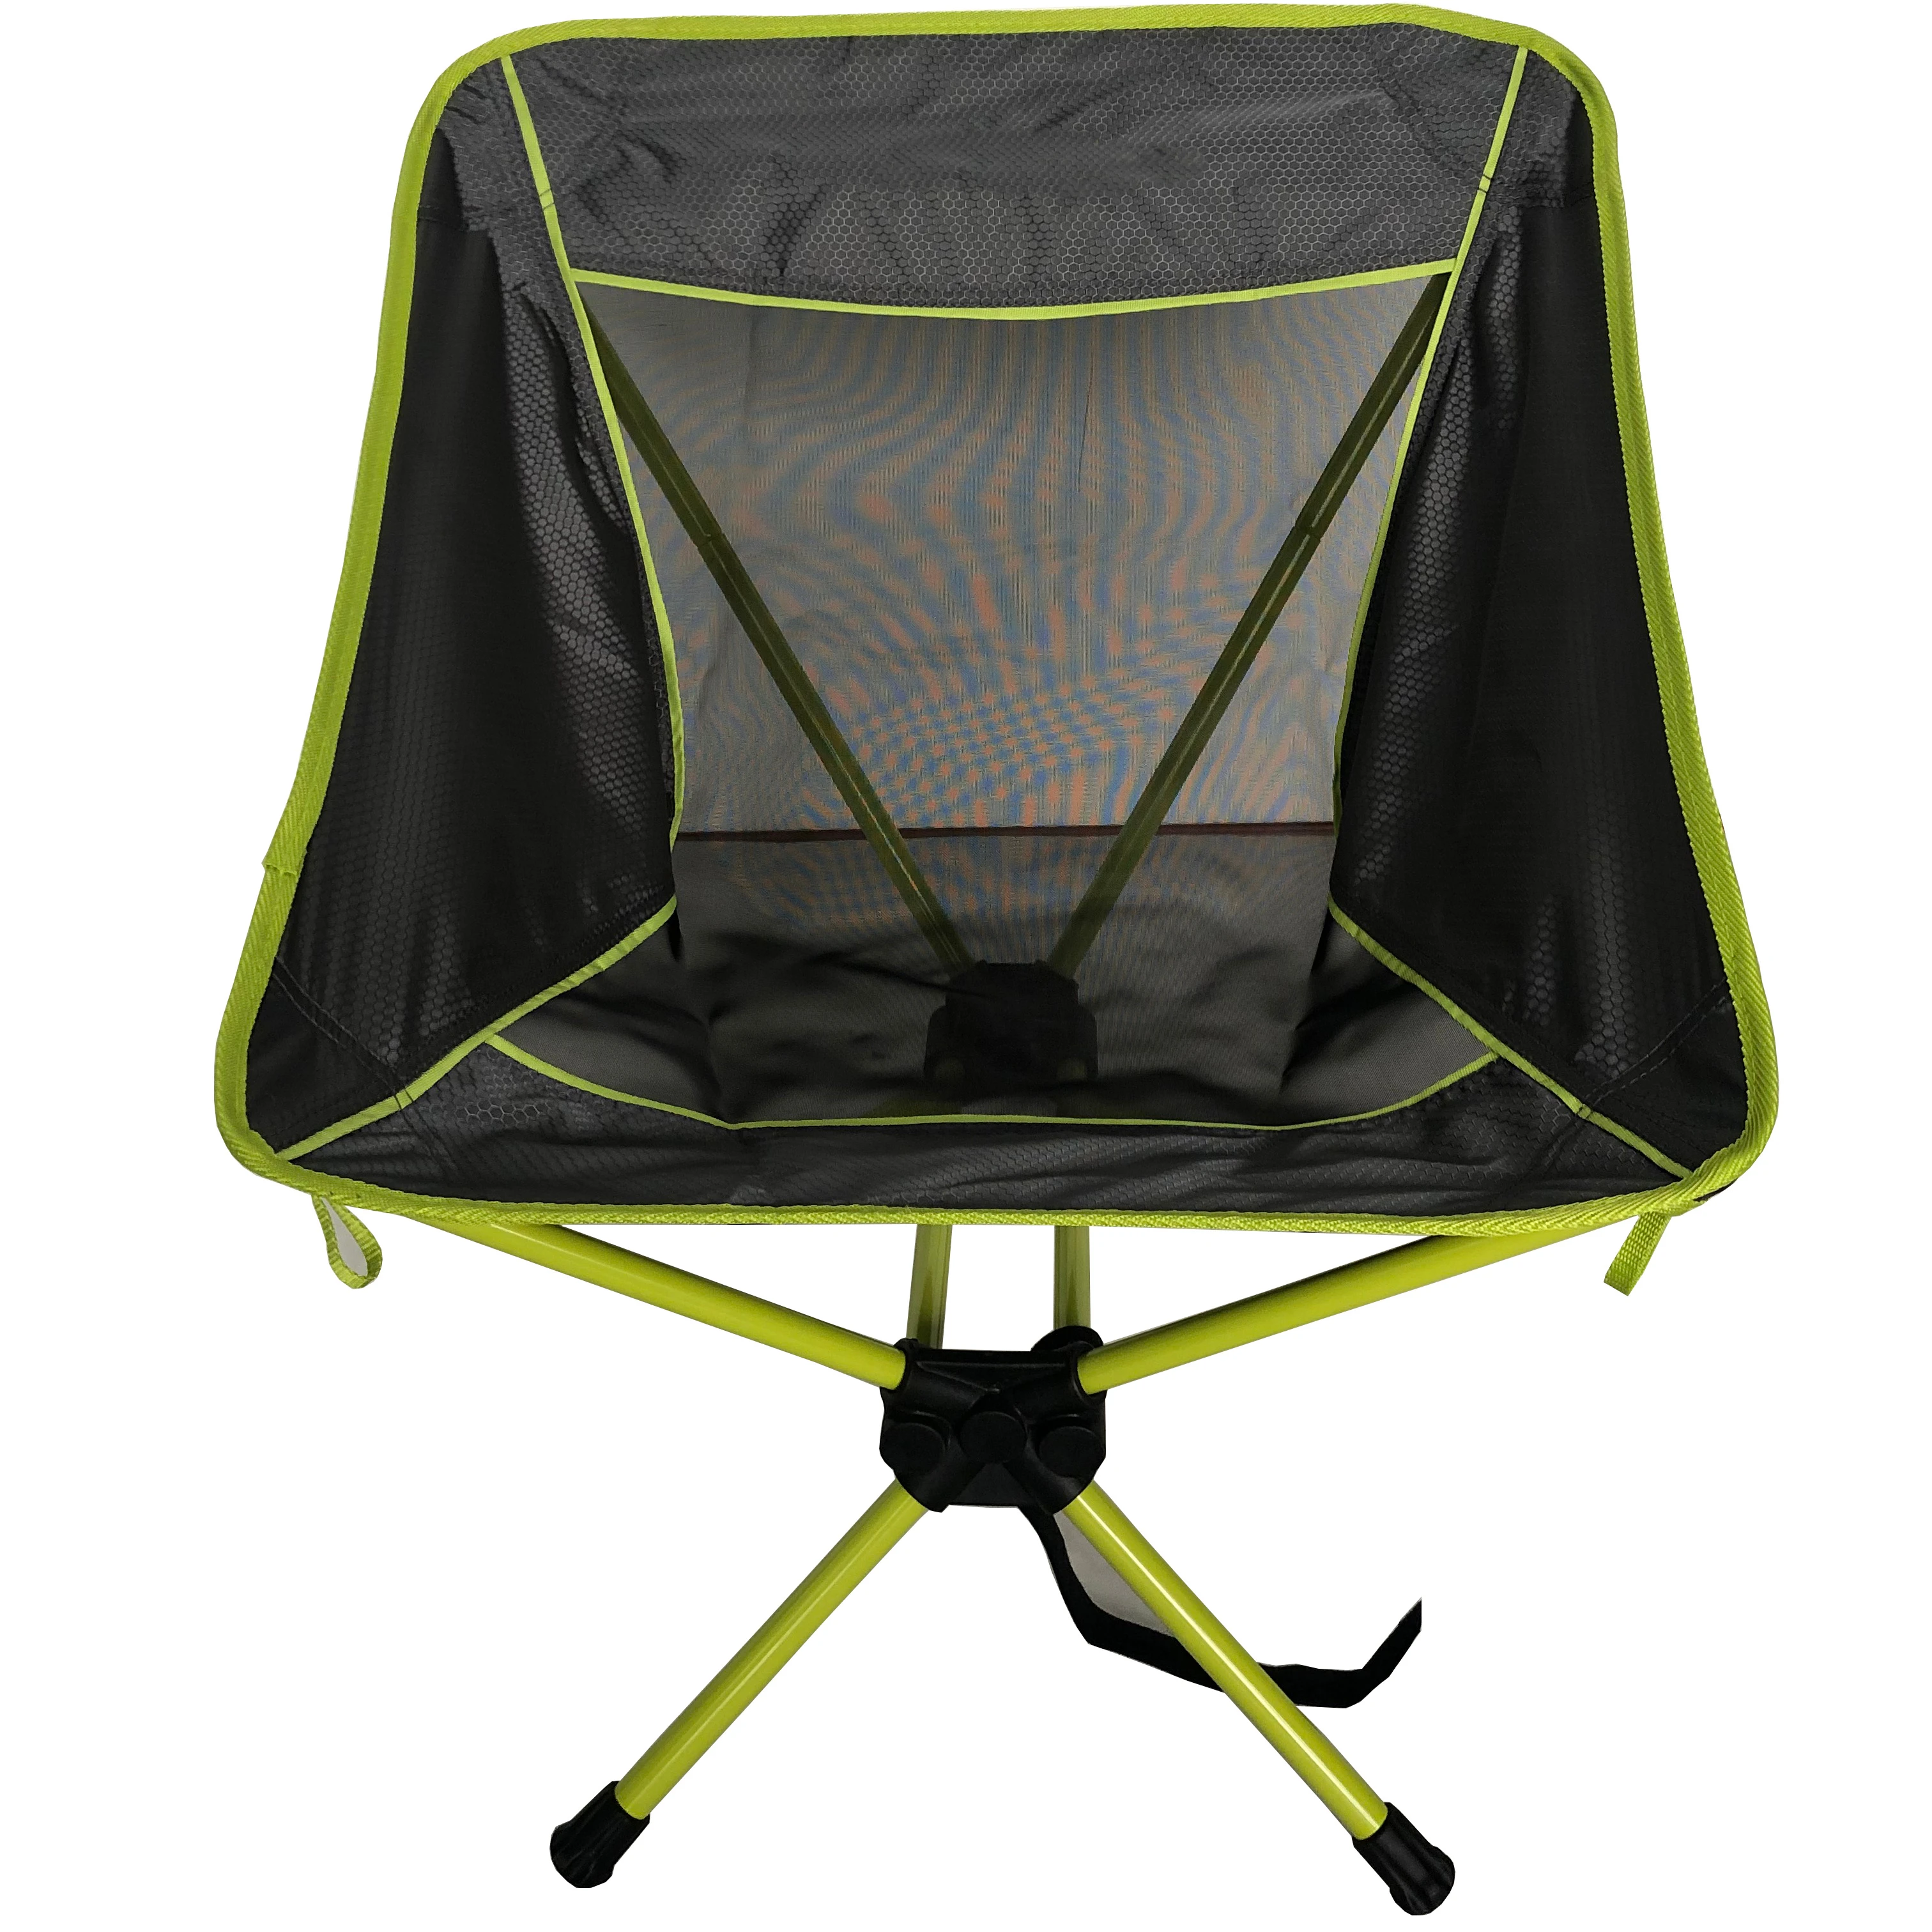 easy foldable chair